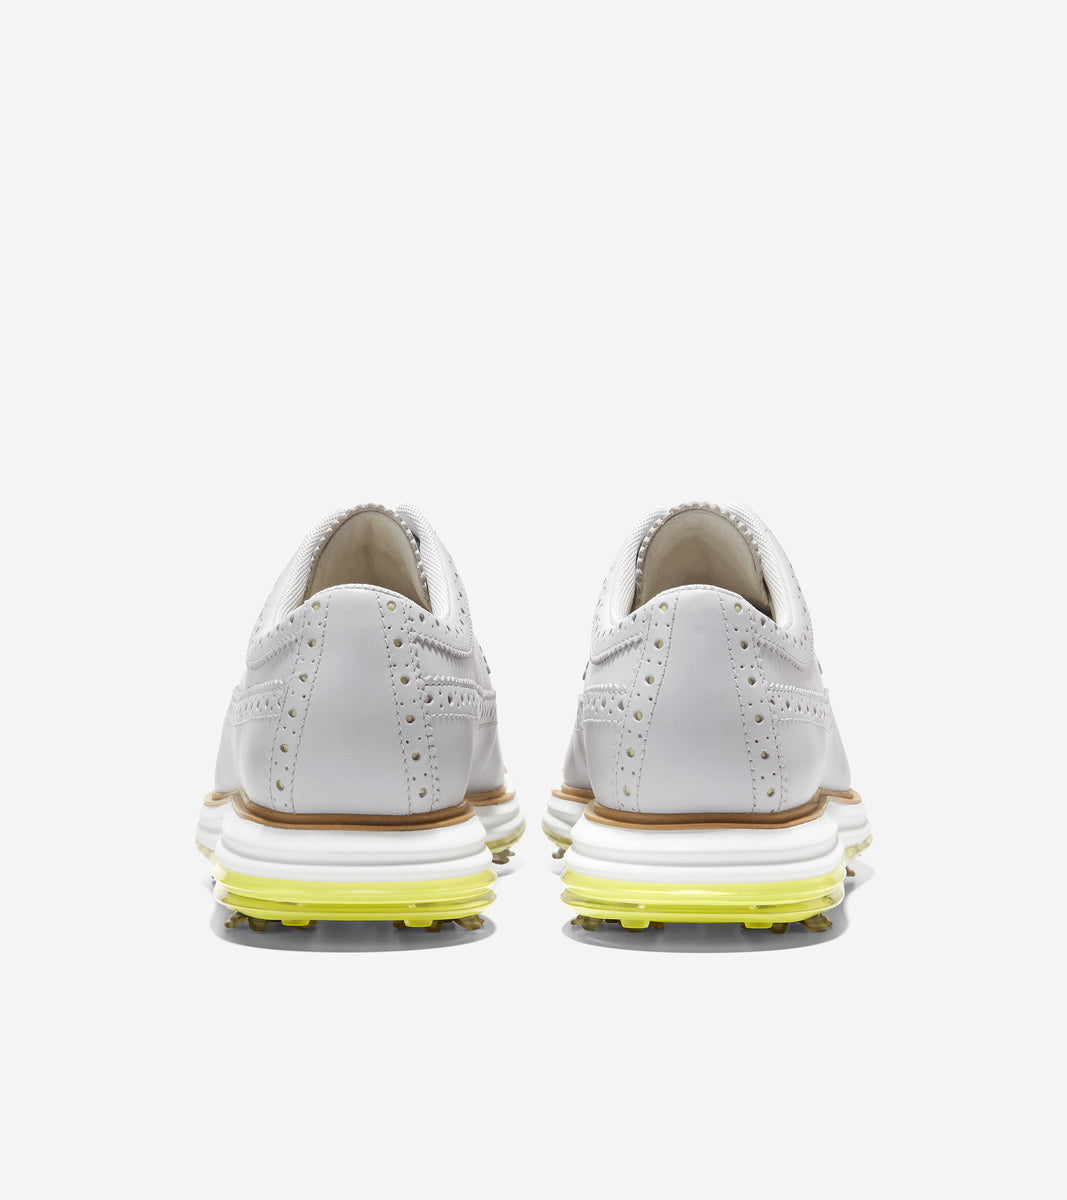 Comfort Bliss LL No Wire 1119246:Pantone Tap Shoe:44F